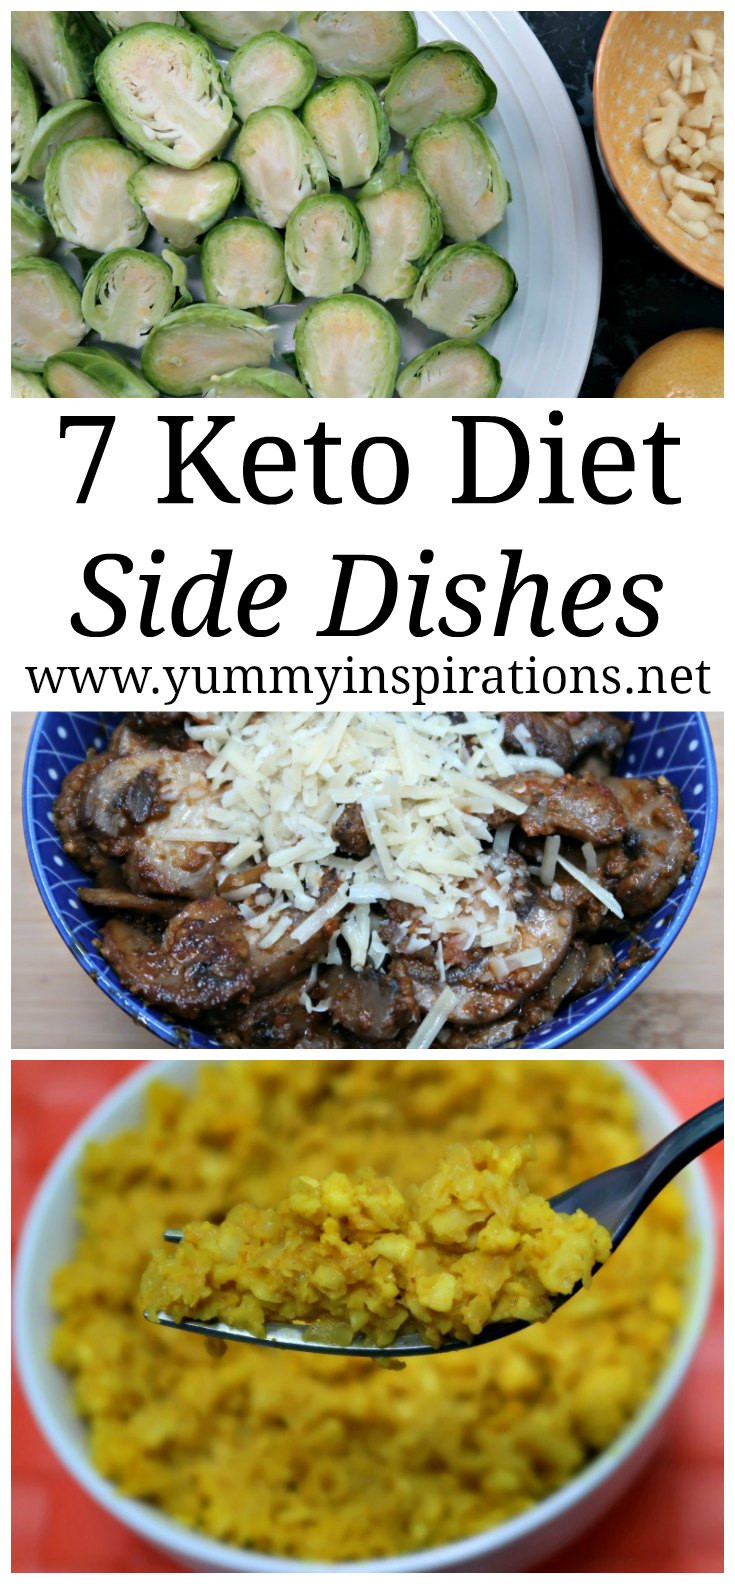 Easy Keto Sides
 7 Keto Side Dishes Easy Low Carb Sides LCHF Recipes